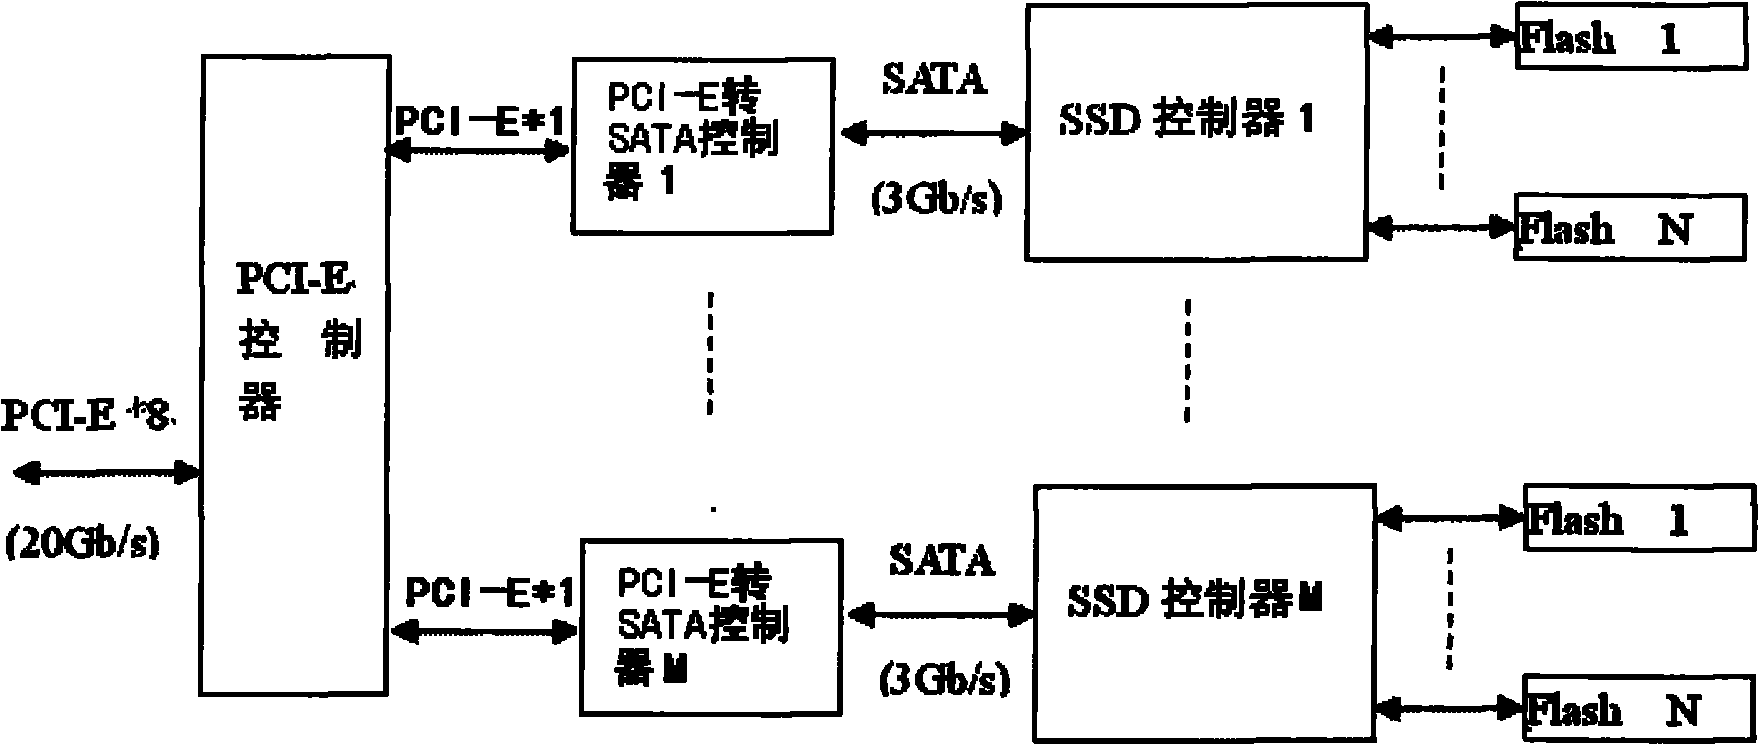 Multi-path solid state disk acceleration method based on PCI-E interface